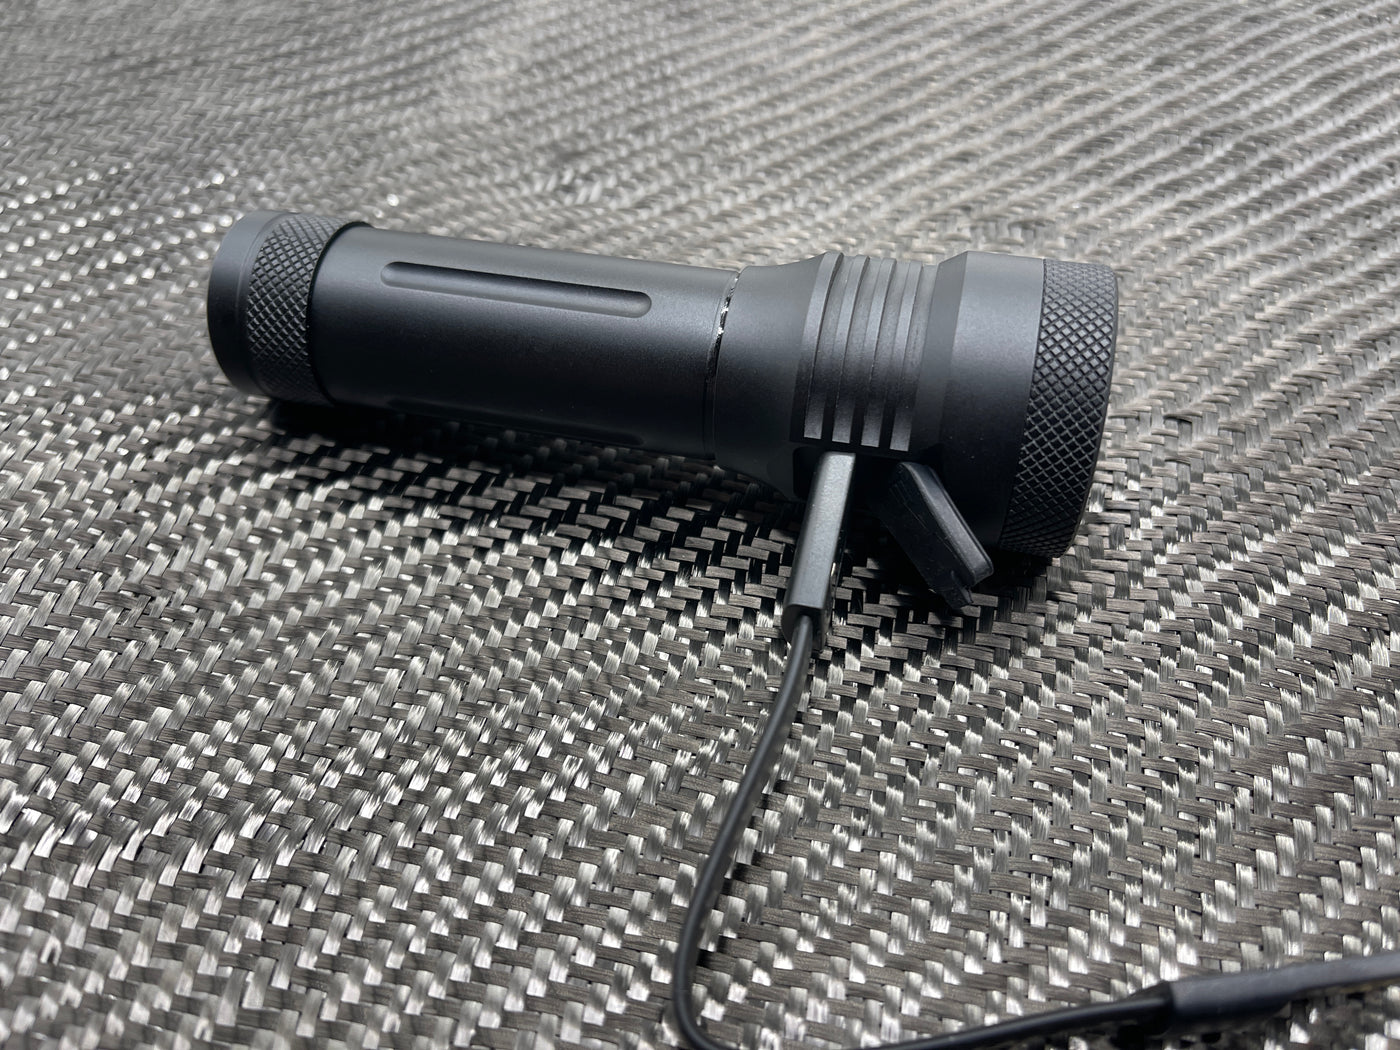 EZ - Throw 18650 / 21700 Flashlight by Maratac® ( + Built In Charger )